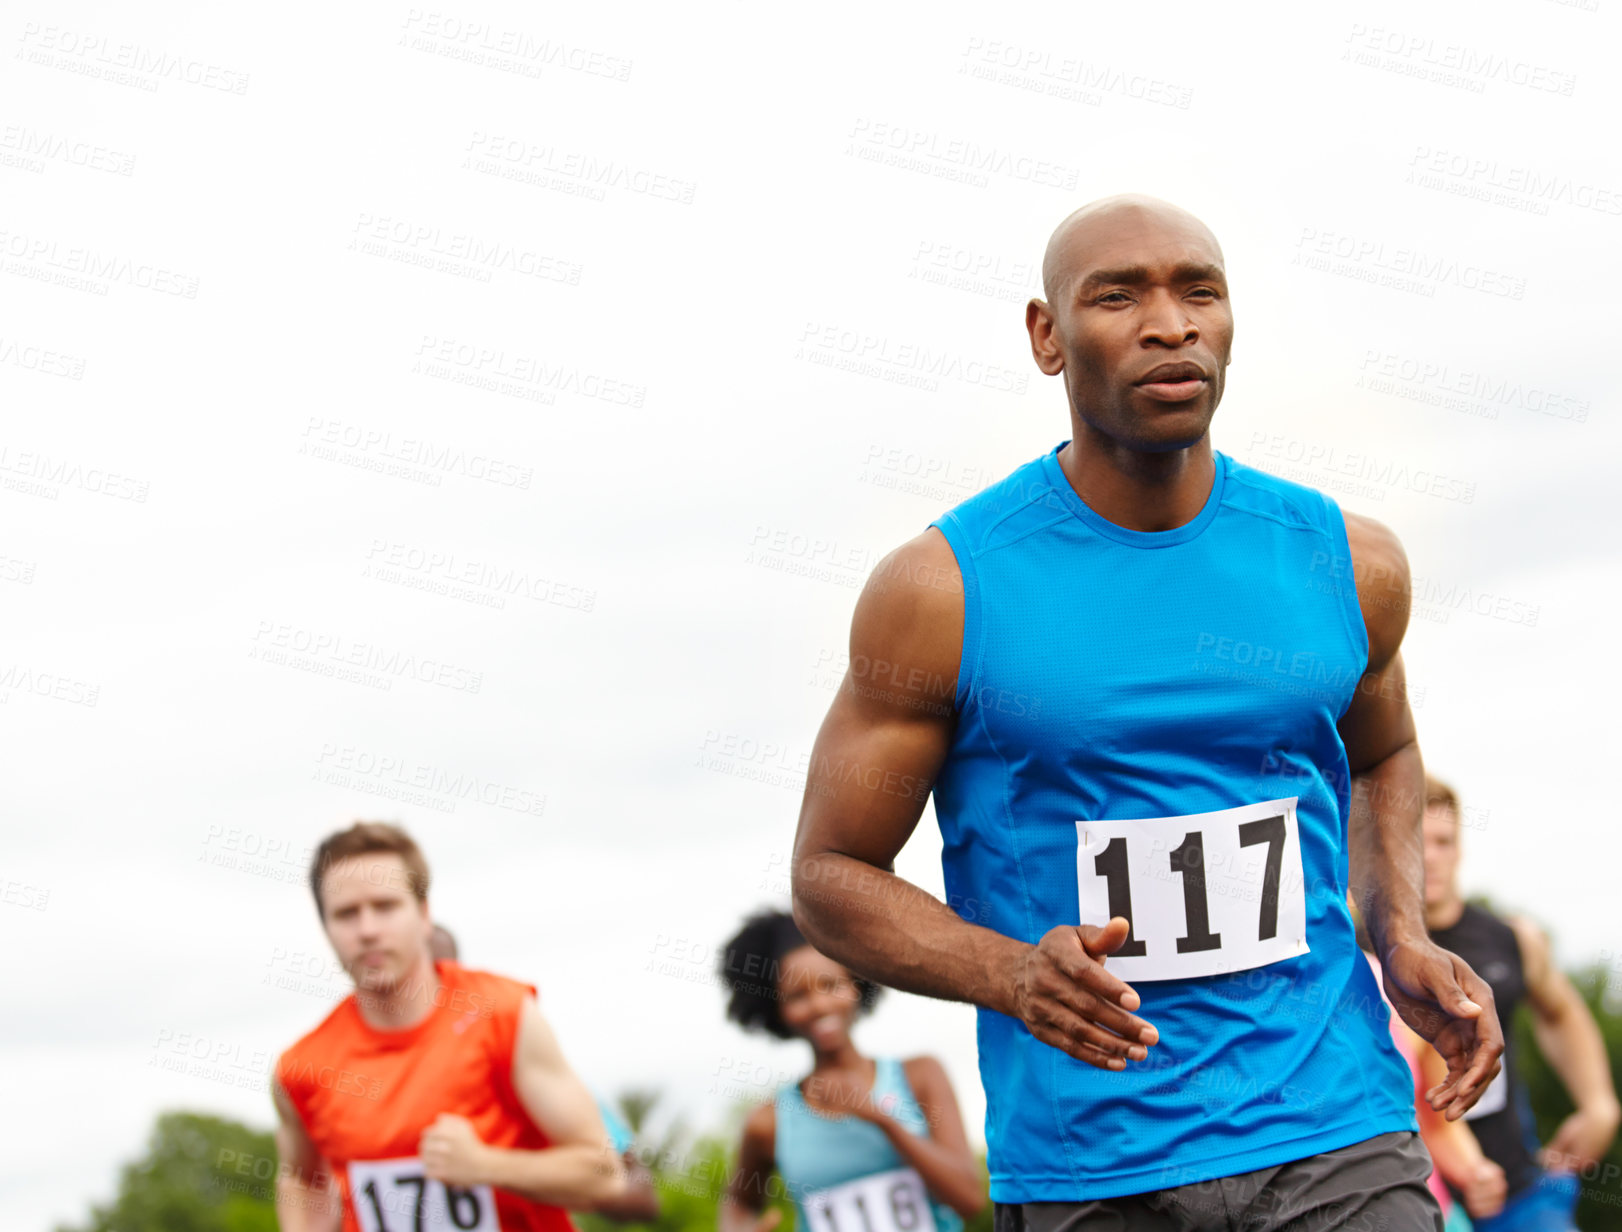 Buy stock photo Cropped front view of a determined male athlete with competitors in the background